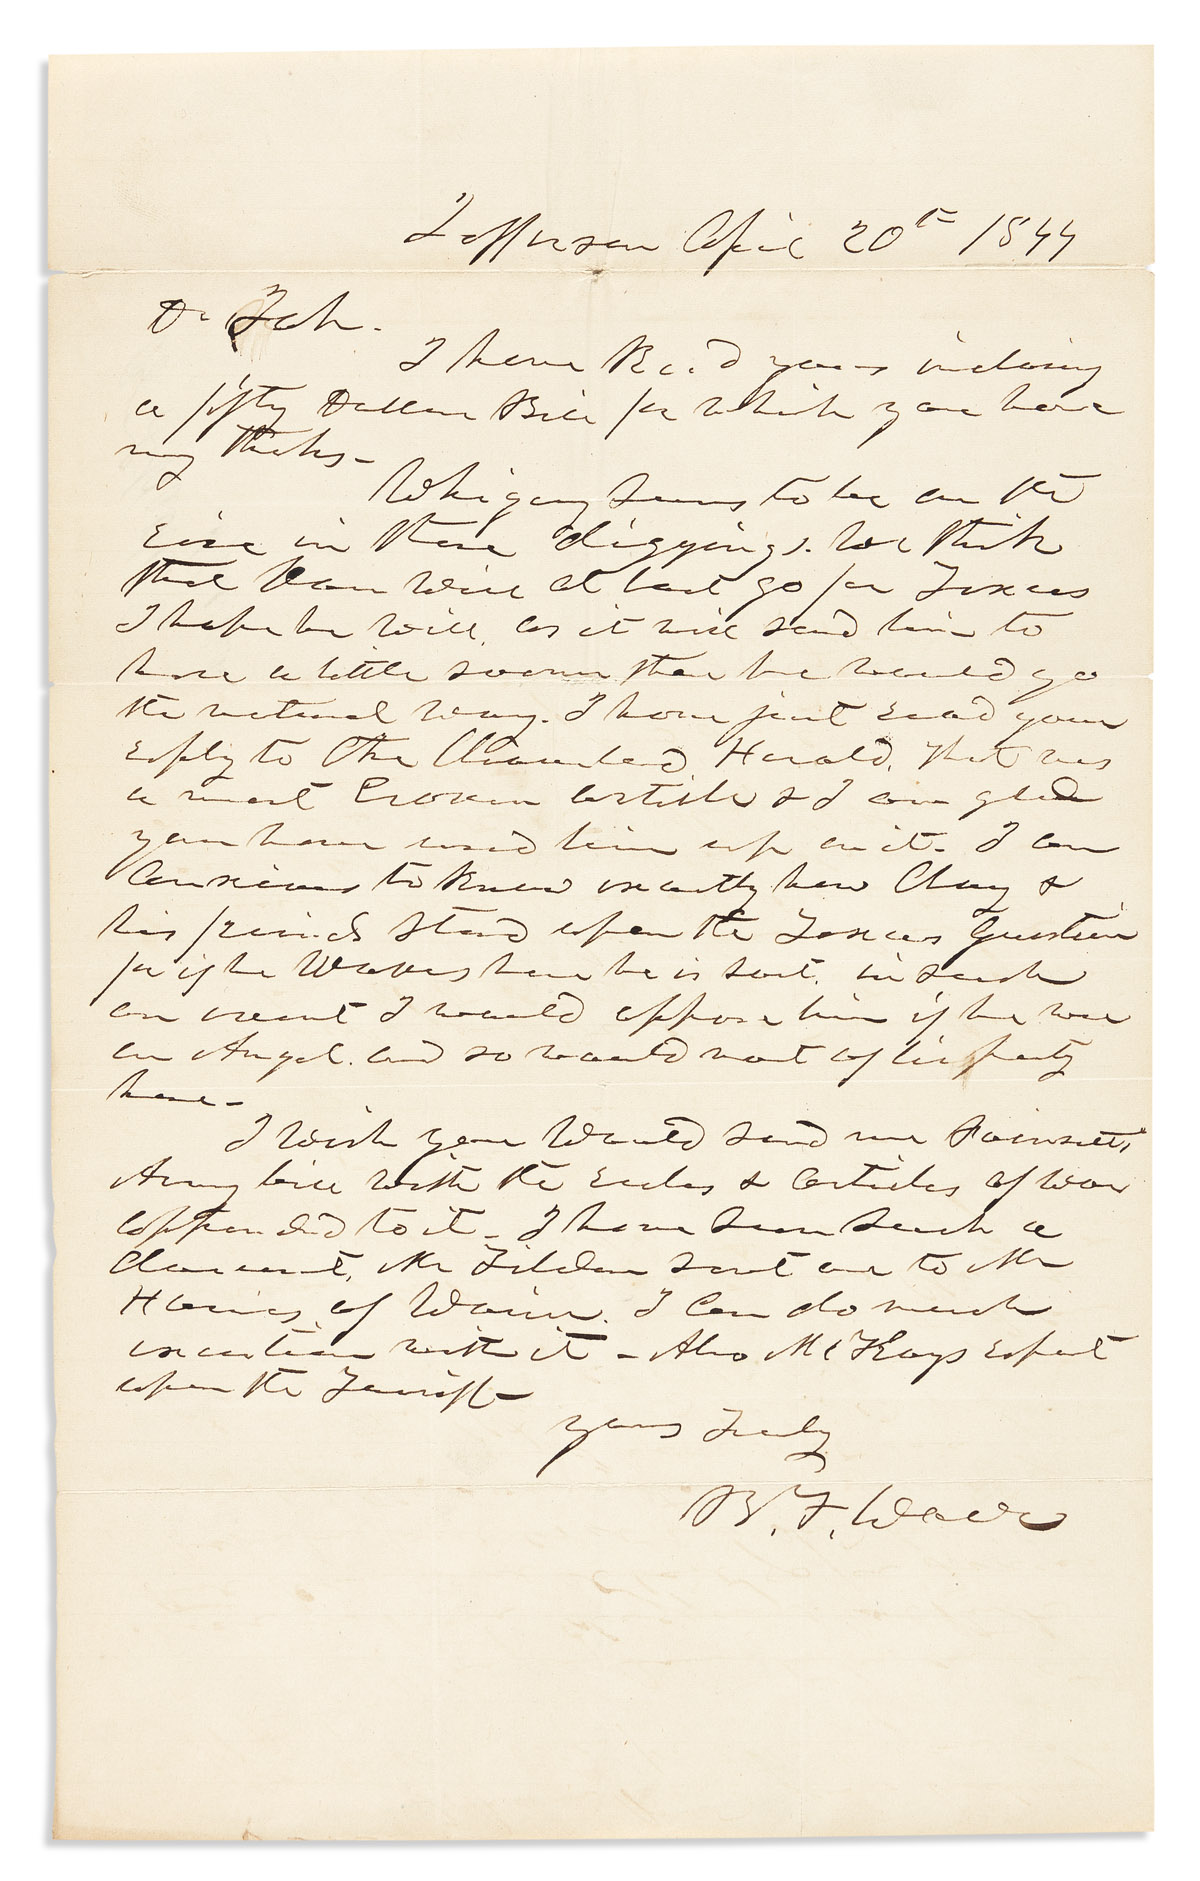 WADE, BENJAMIN F. Autograph Letter Signed, B.F. Wade, to Dr Sch.,